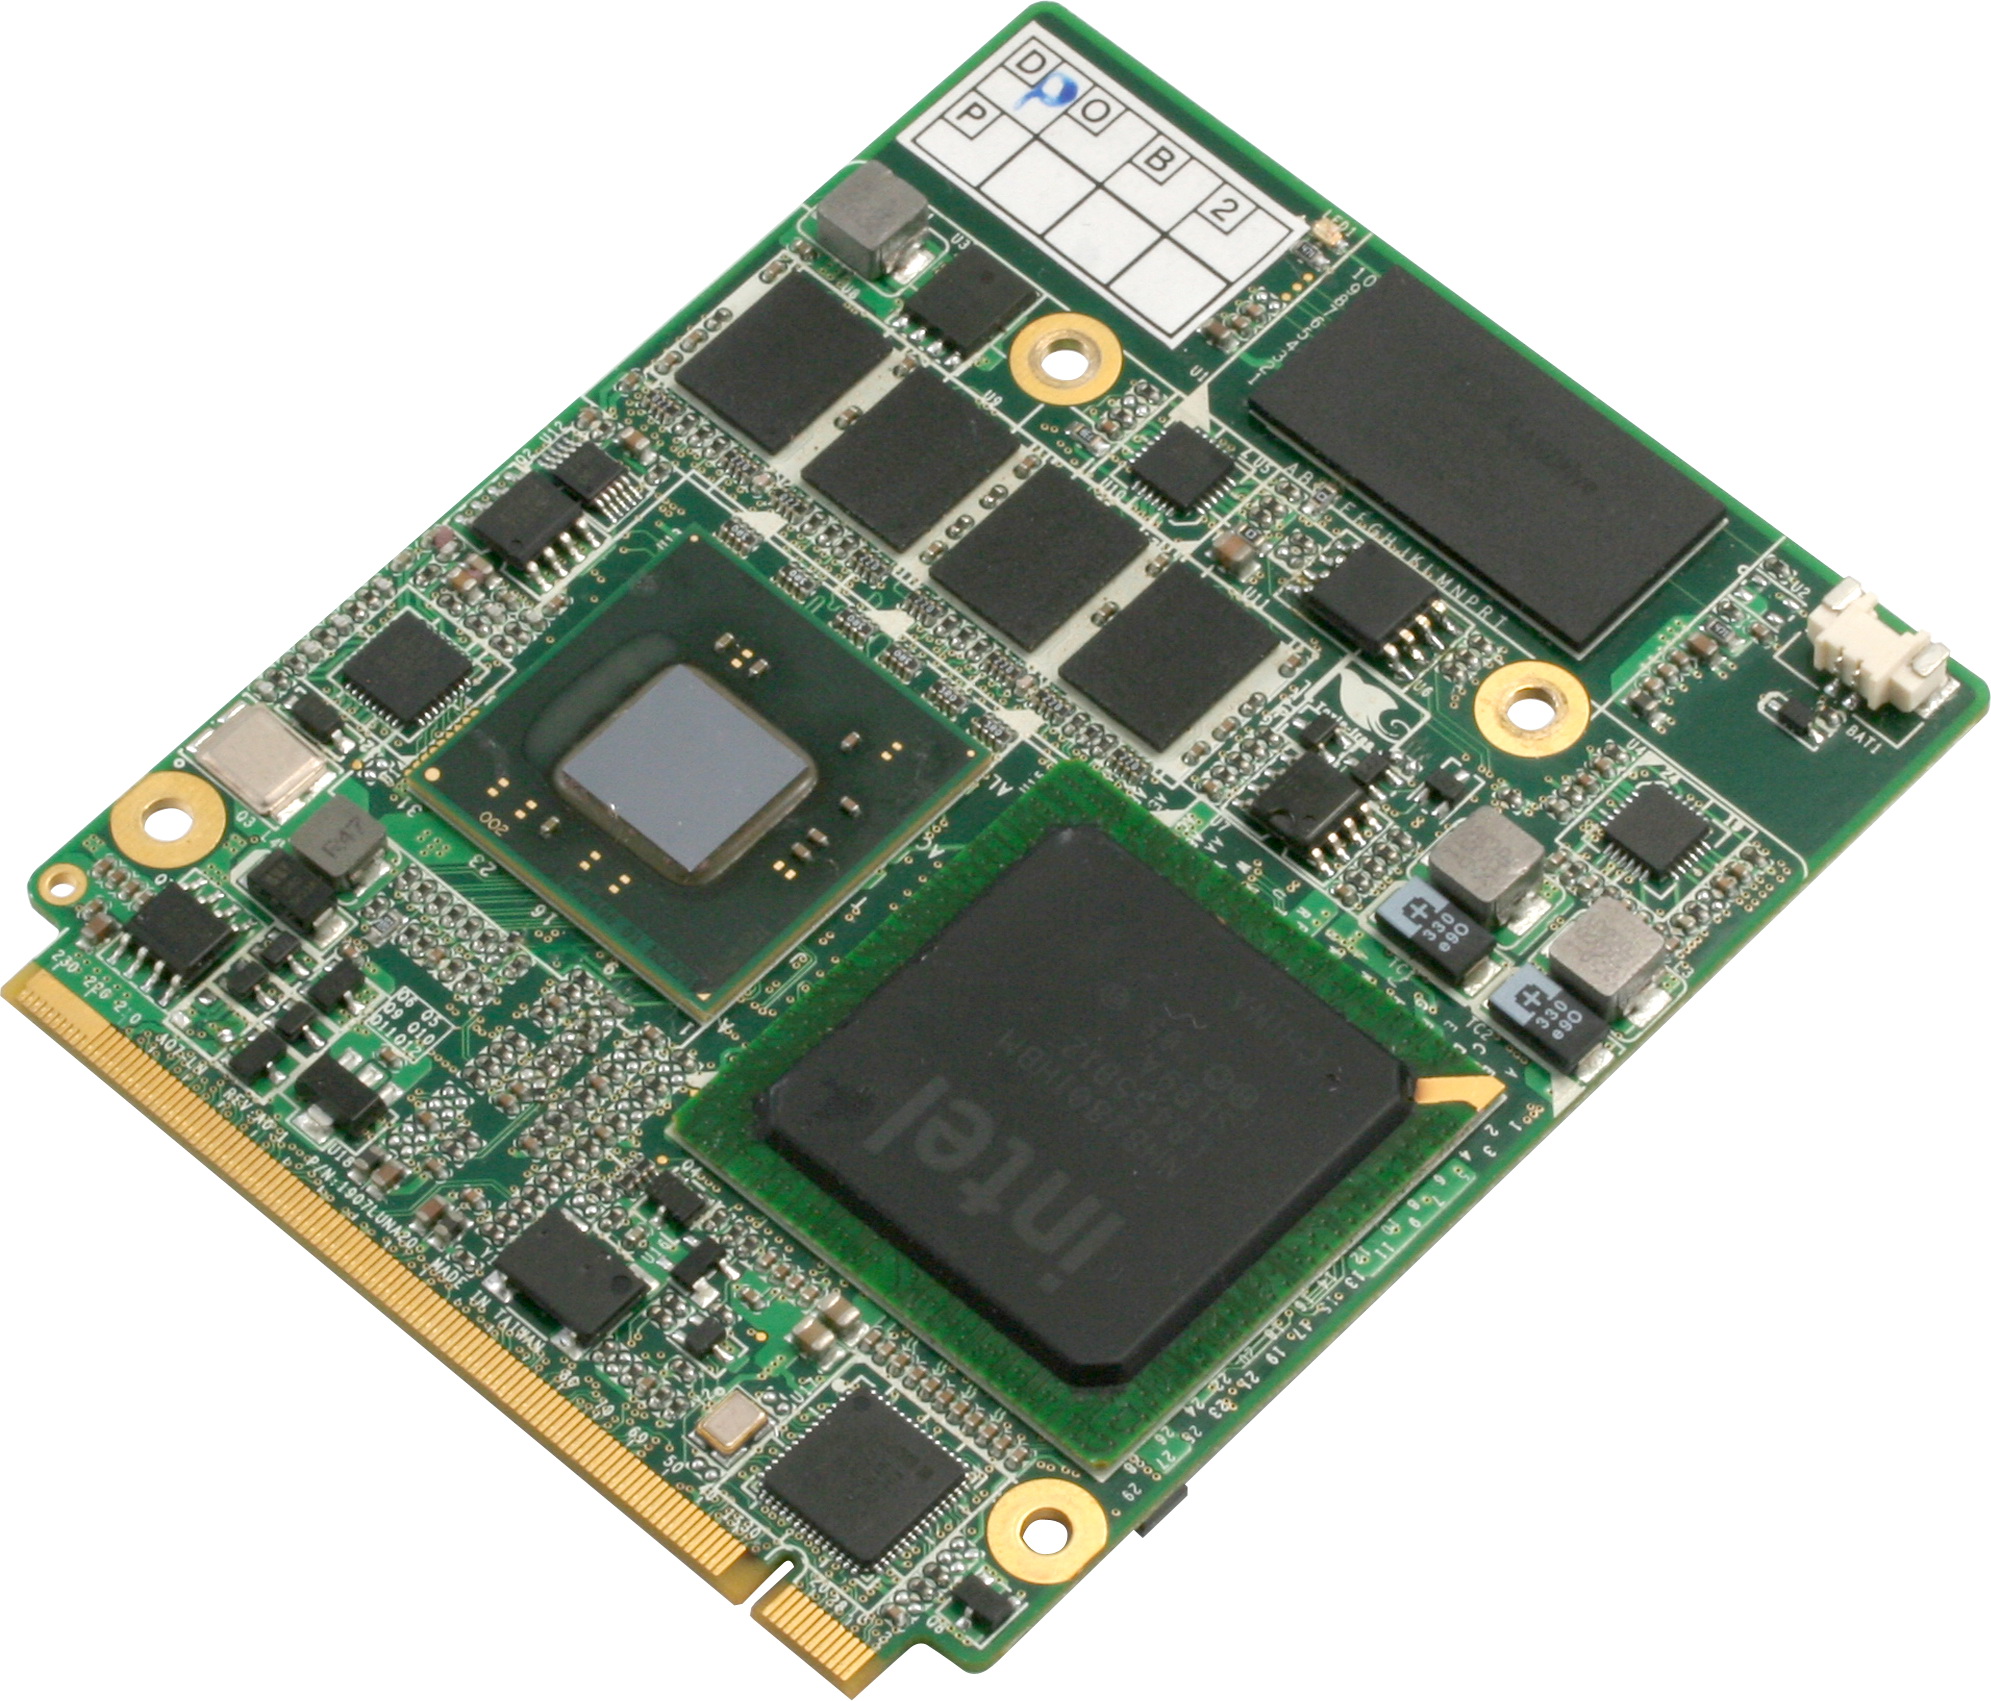 New Qseven CPU module delivers high speed serial interfaces in a cost efficient form factor